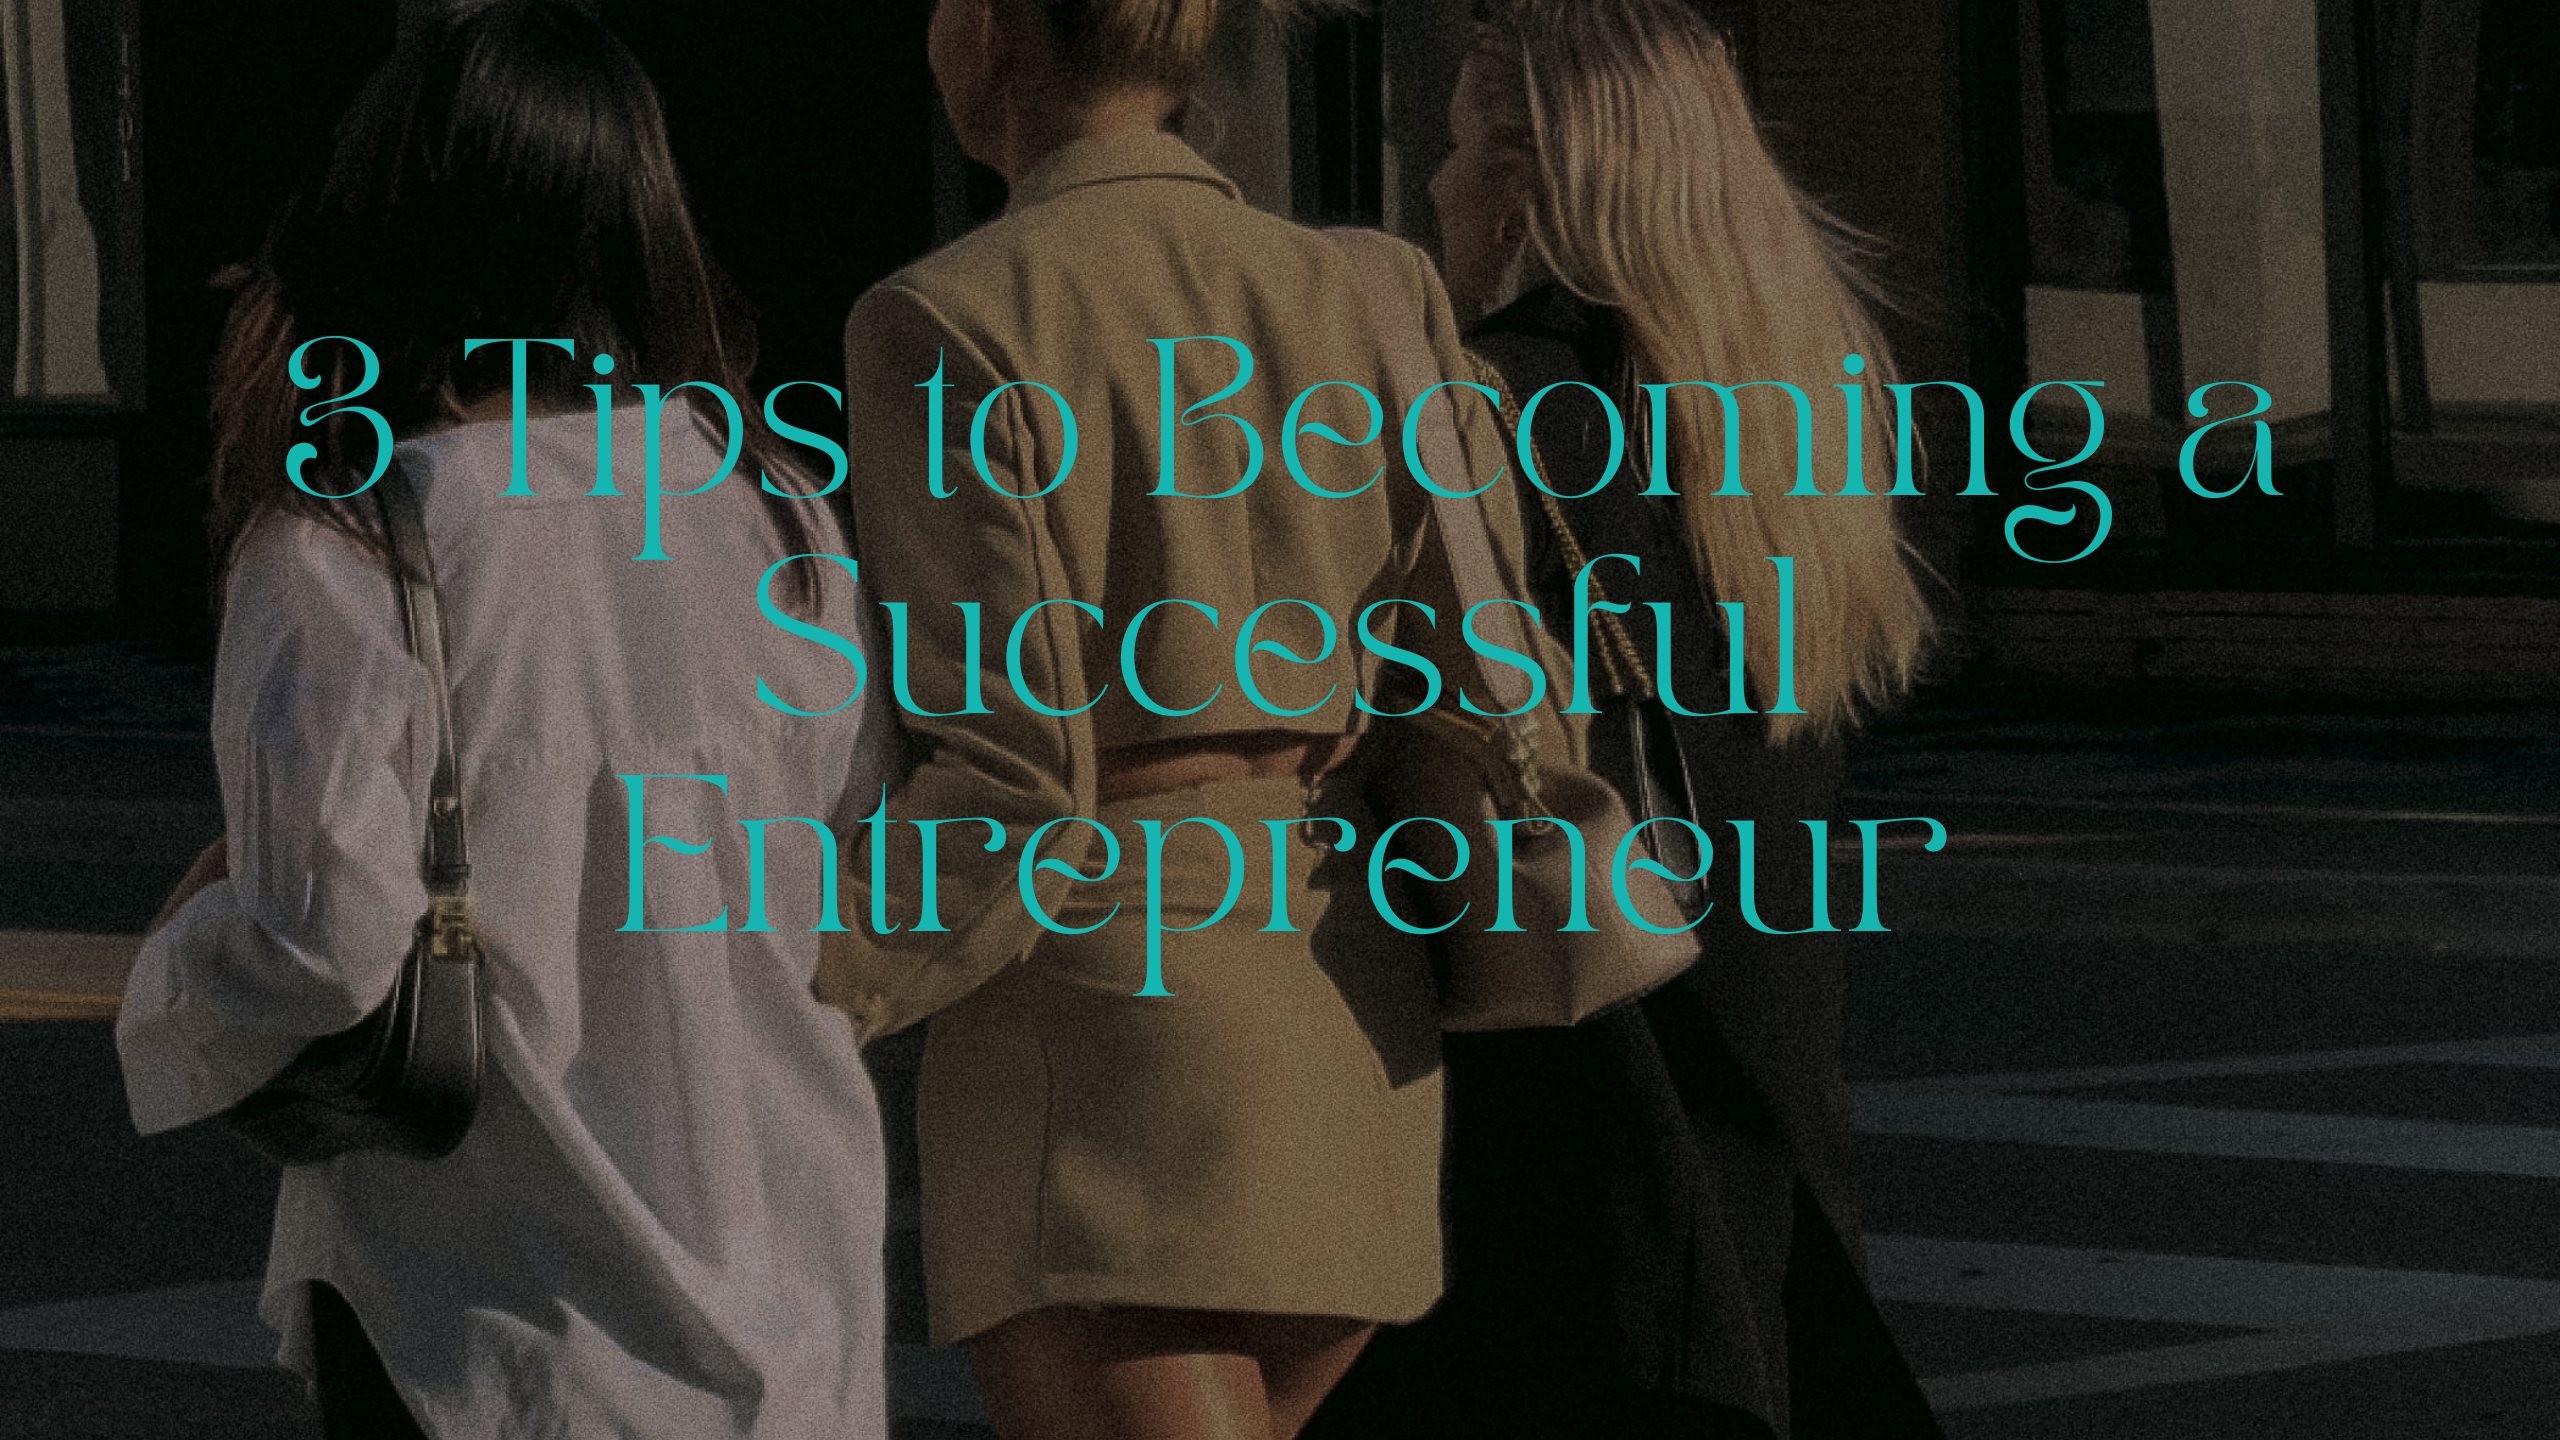 3 Tips for Becoming a Successful Entrepreneur with 3 women walking together